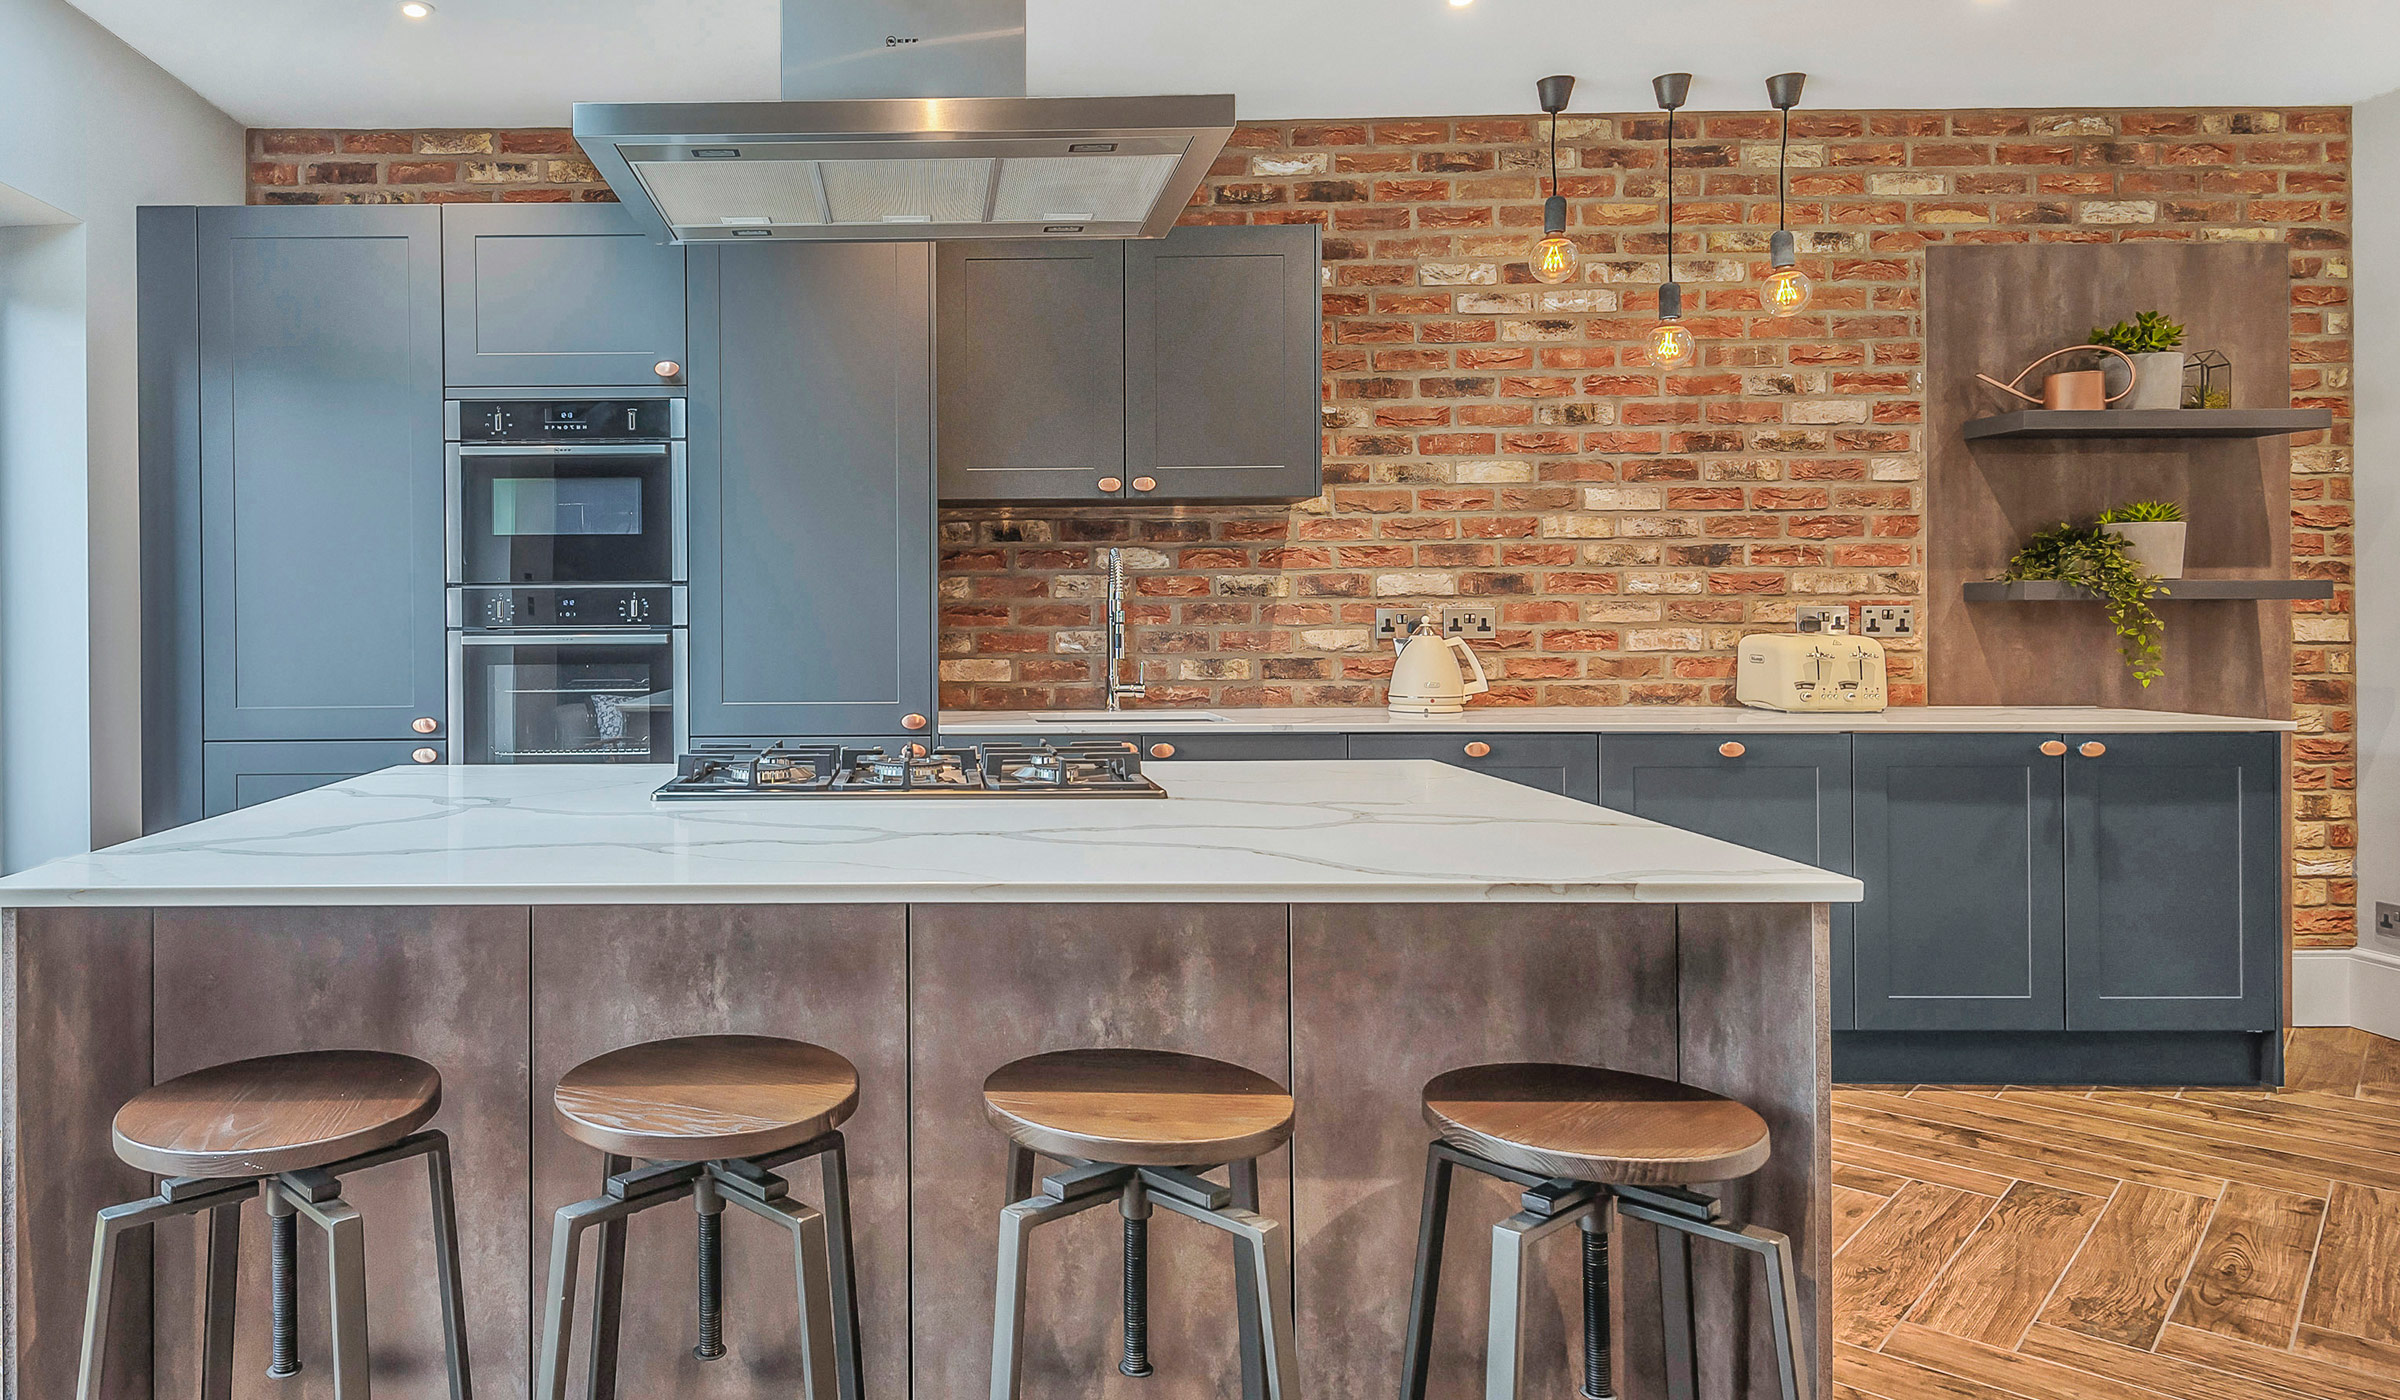 small industrial kitchen with breakfast bar island seating, exposed brick wall and open shelving